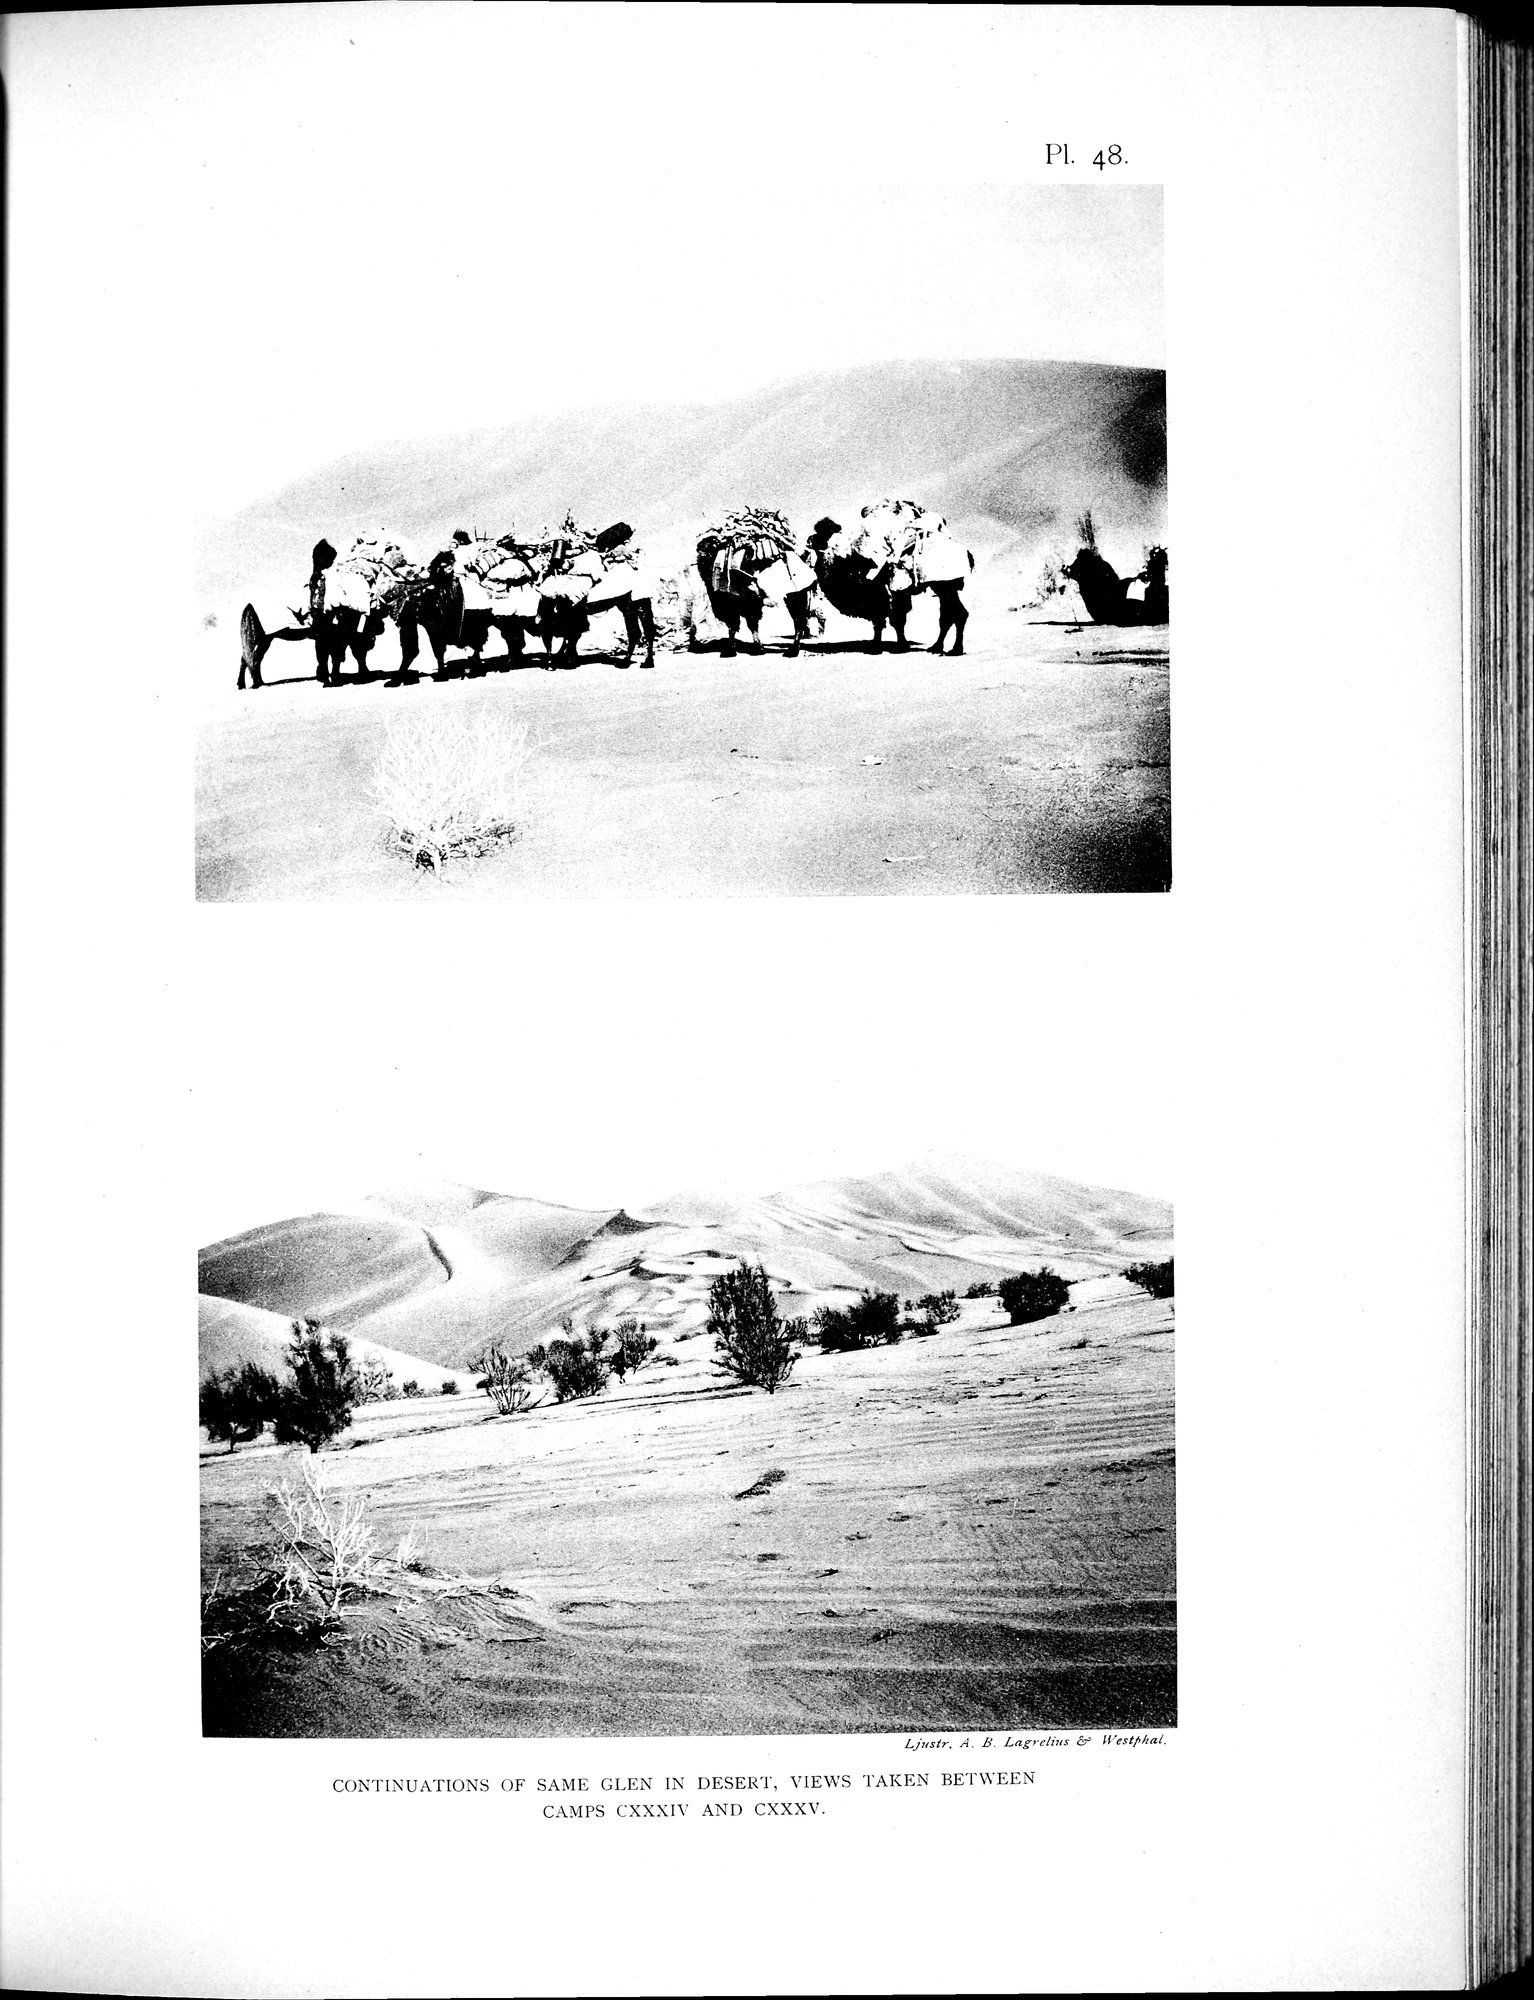 Scientific Results of a Journey in Central Asia, 1899-1902 : vol.2 / 543 ページ（白黒高解像度画像）